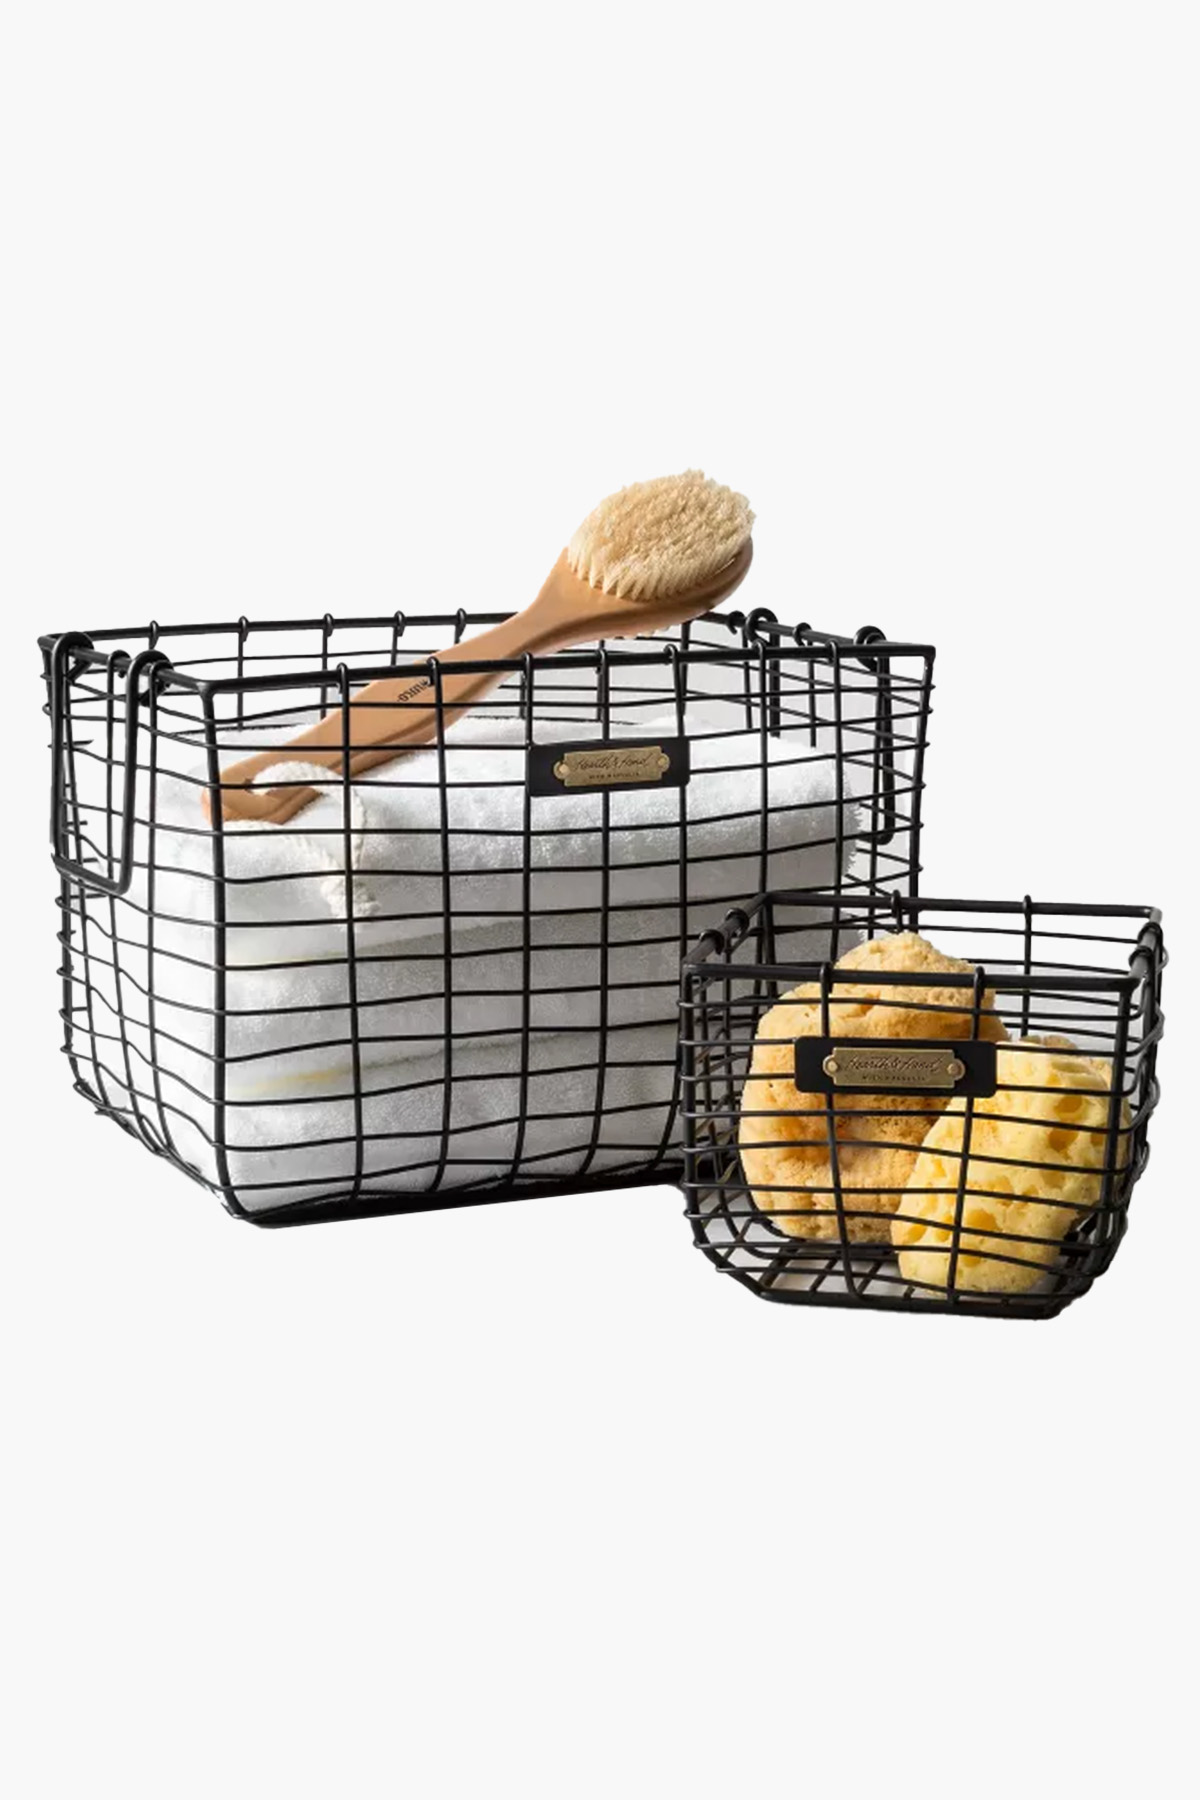 Aesthetic Storage Baskets for BILLY Bookcase Shelves